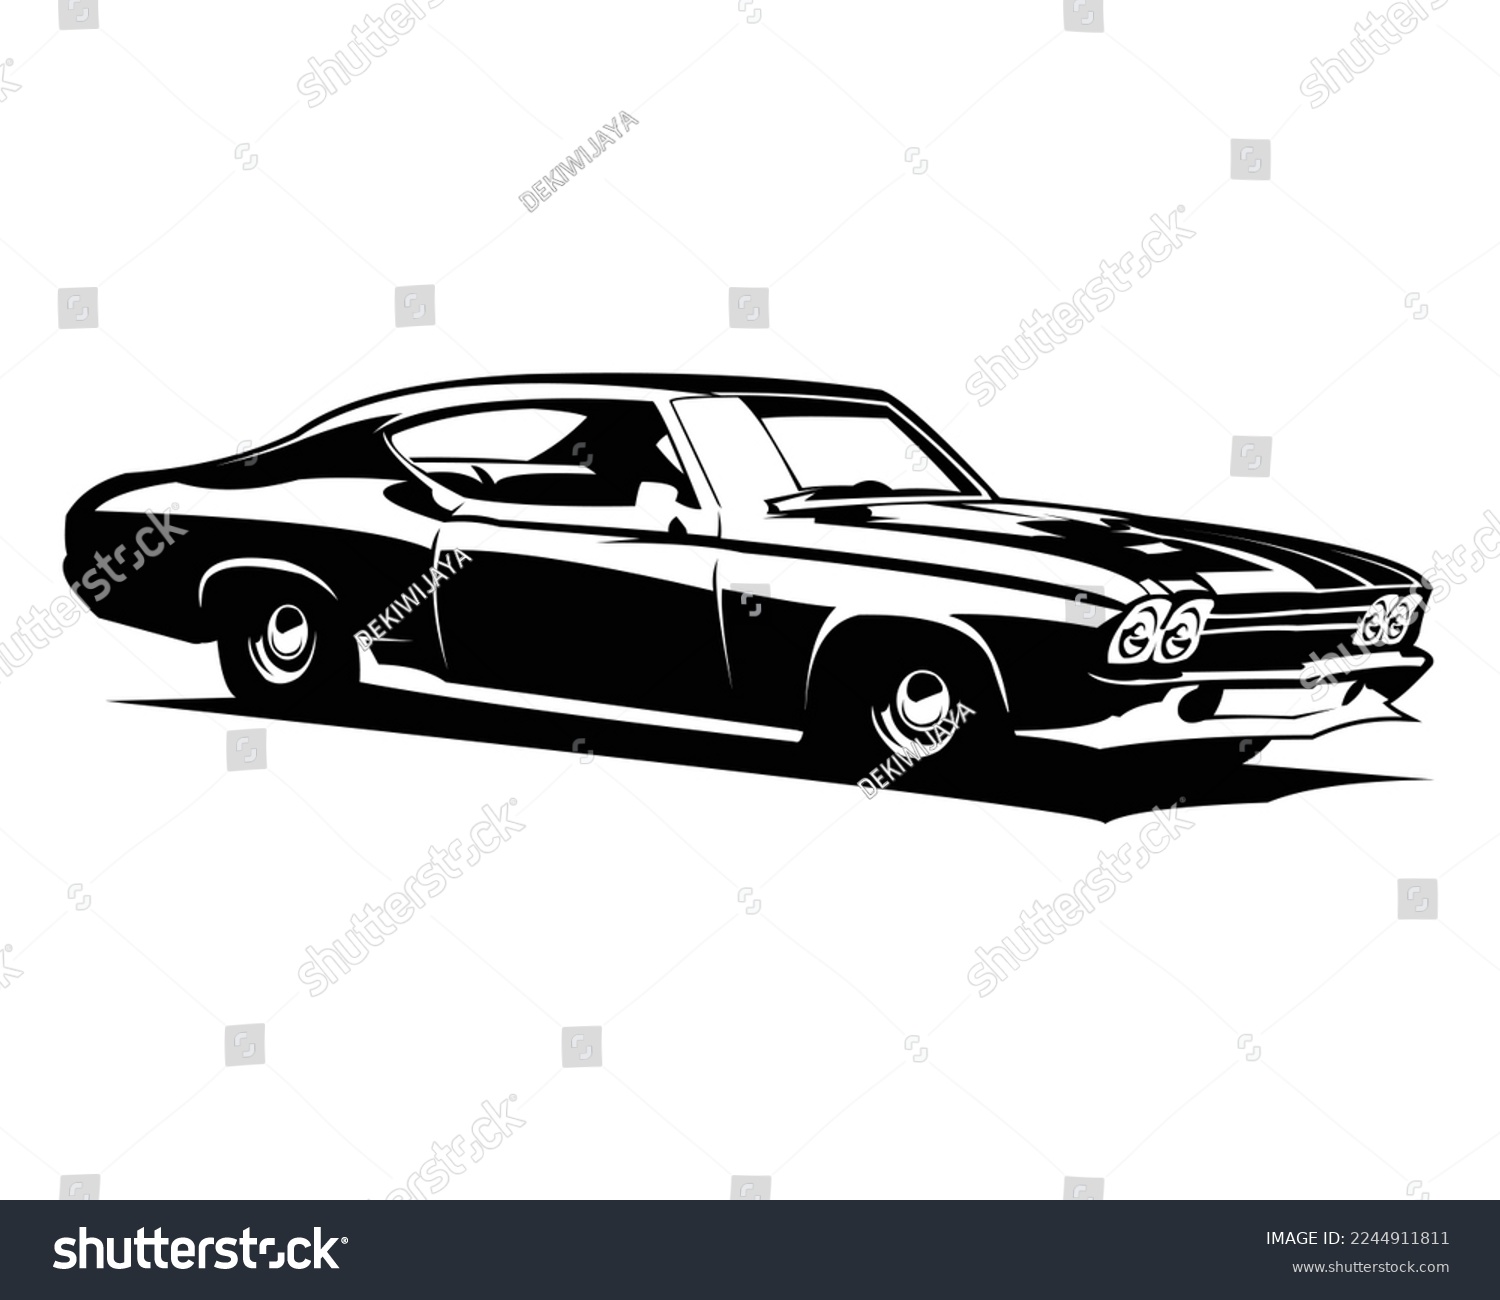 SVG of  old chevy camaro car logo. view from side isolated white background. Best for badge, emblem, concept, design sticker, t-shirt and auto industry. svg